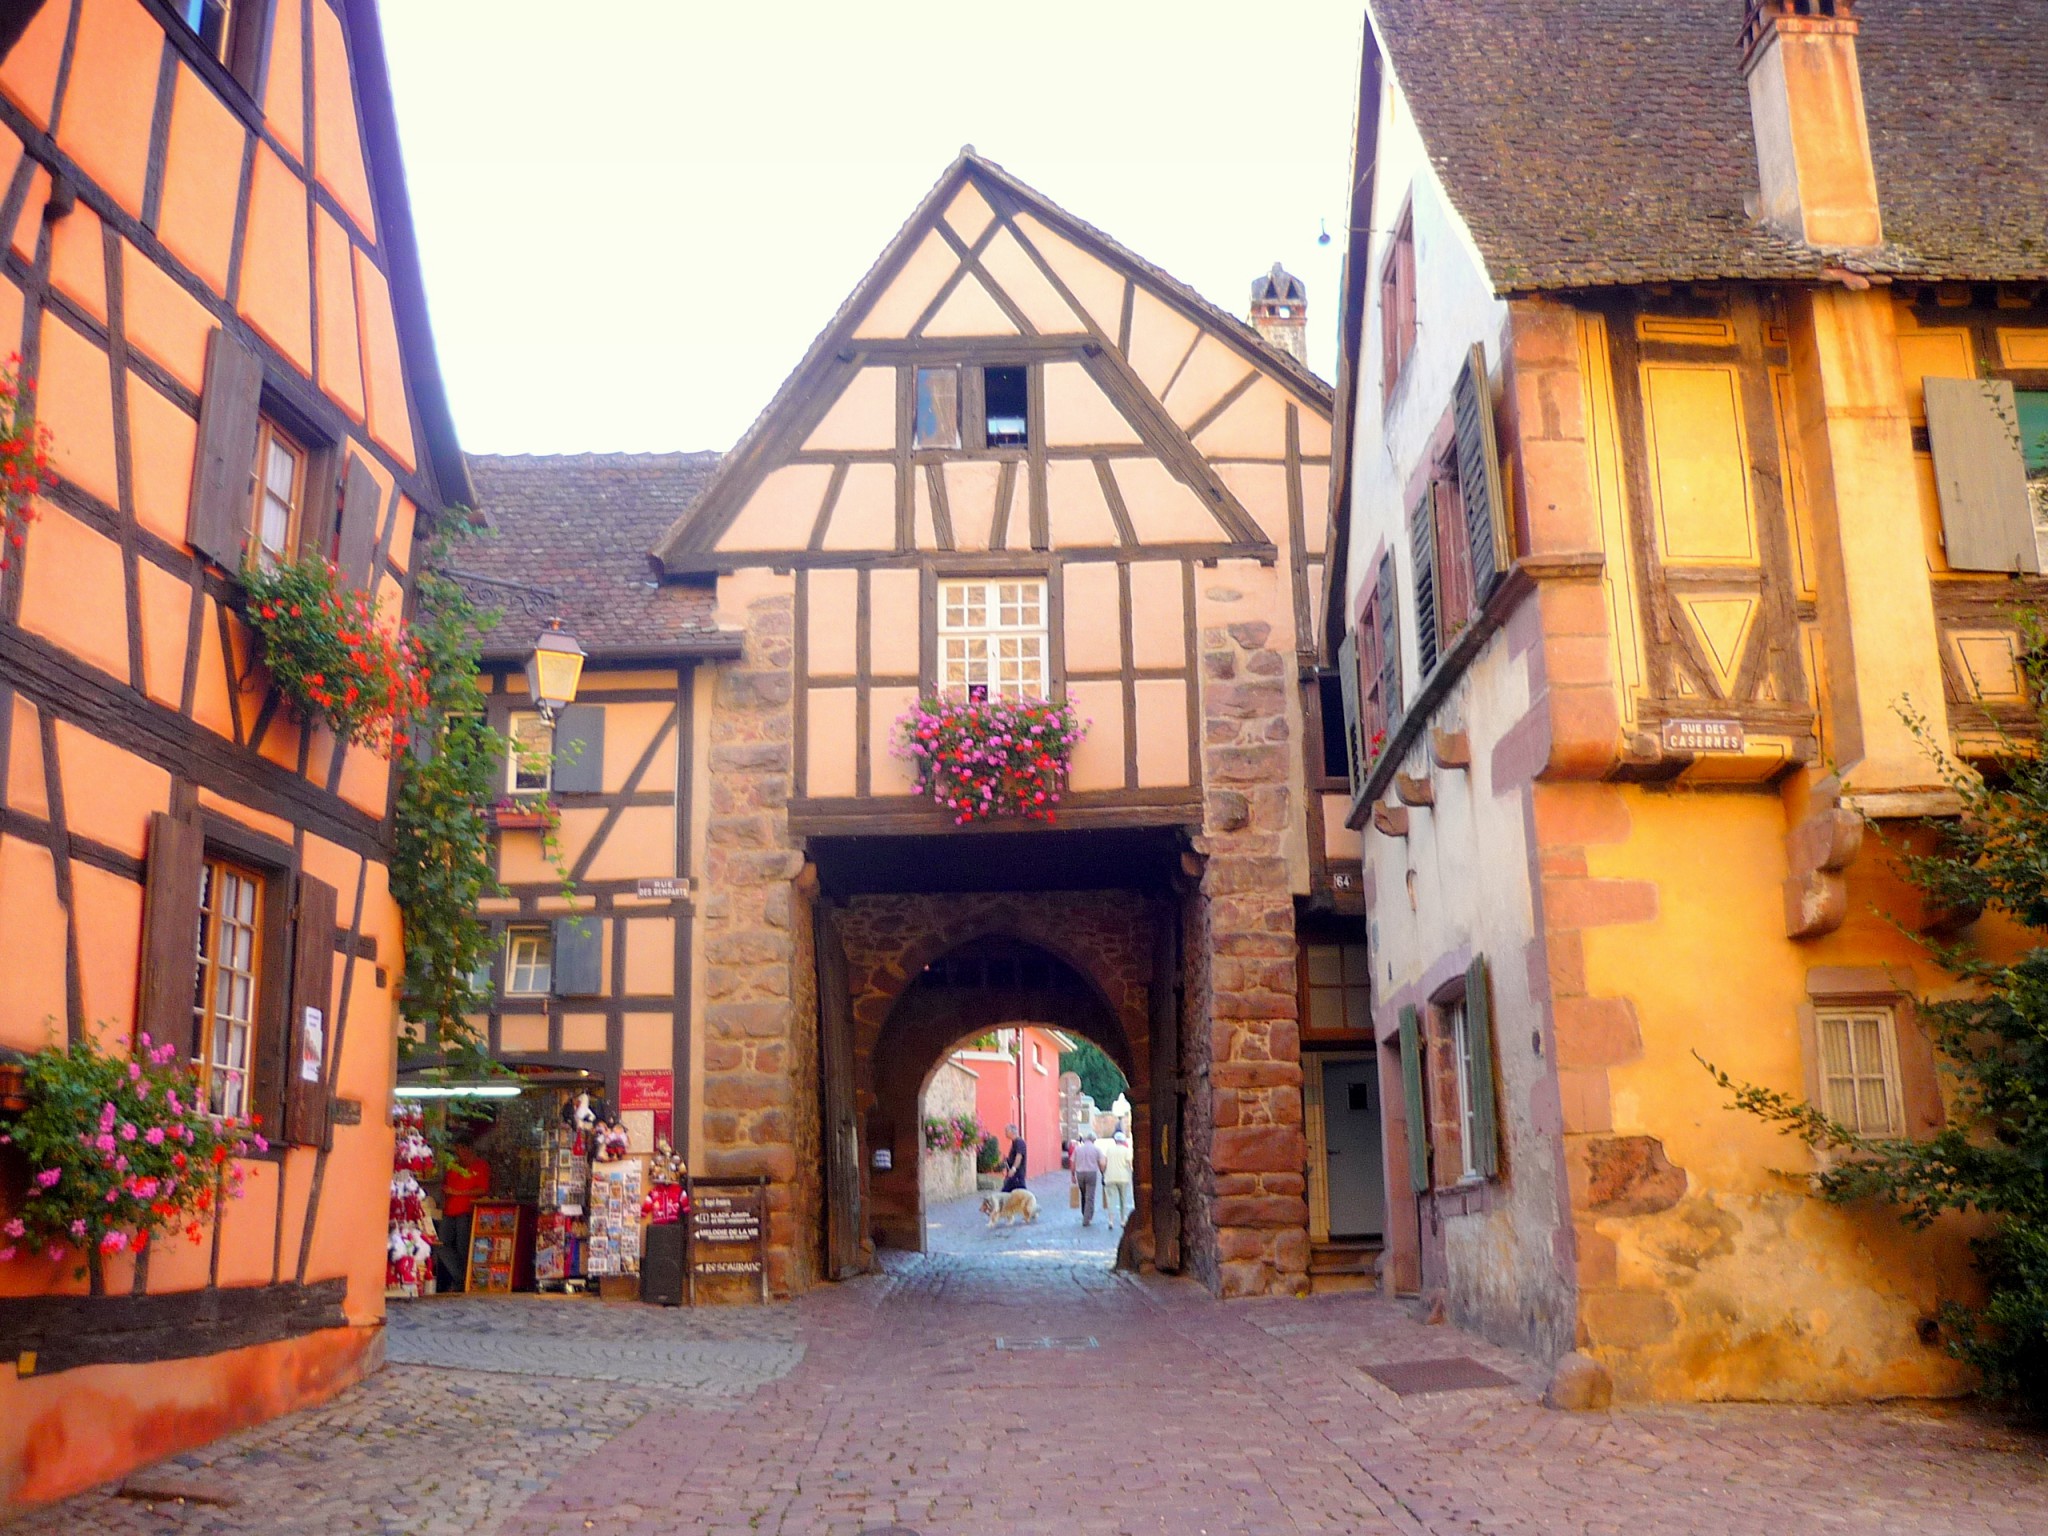 The Obertor in Riquewihr © French Moments